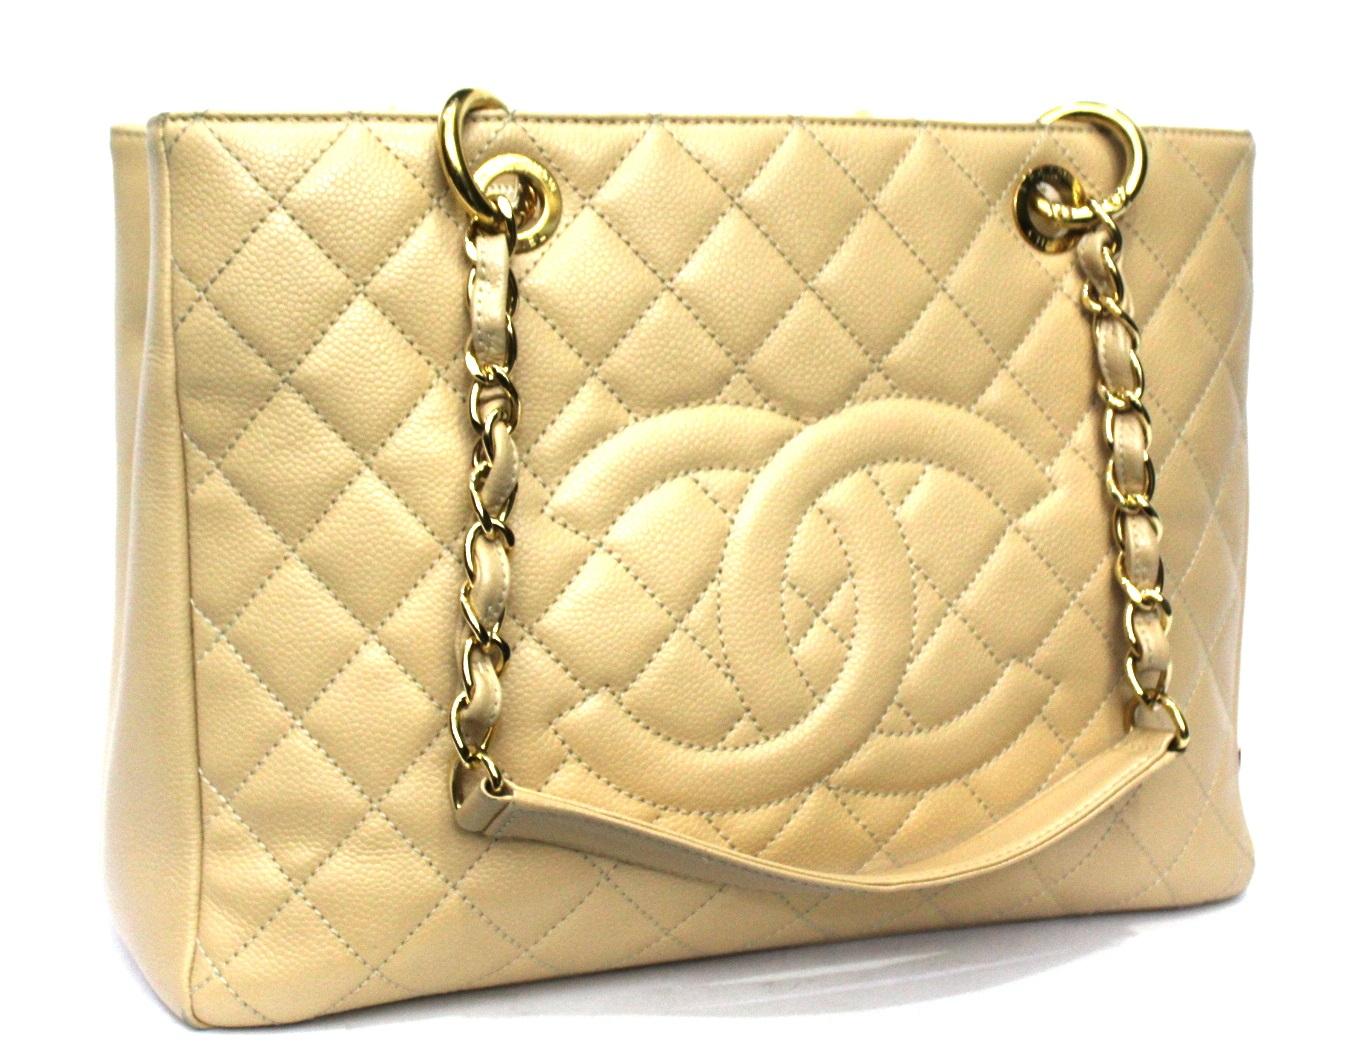 This elegant Chanel bag will be your new favorite bag.
It is part of the classic Chanel collection that continuously increases in value.
It is made of beige quilted lambskin with logo on the front and gold hardware.
The bag has some stains inside